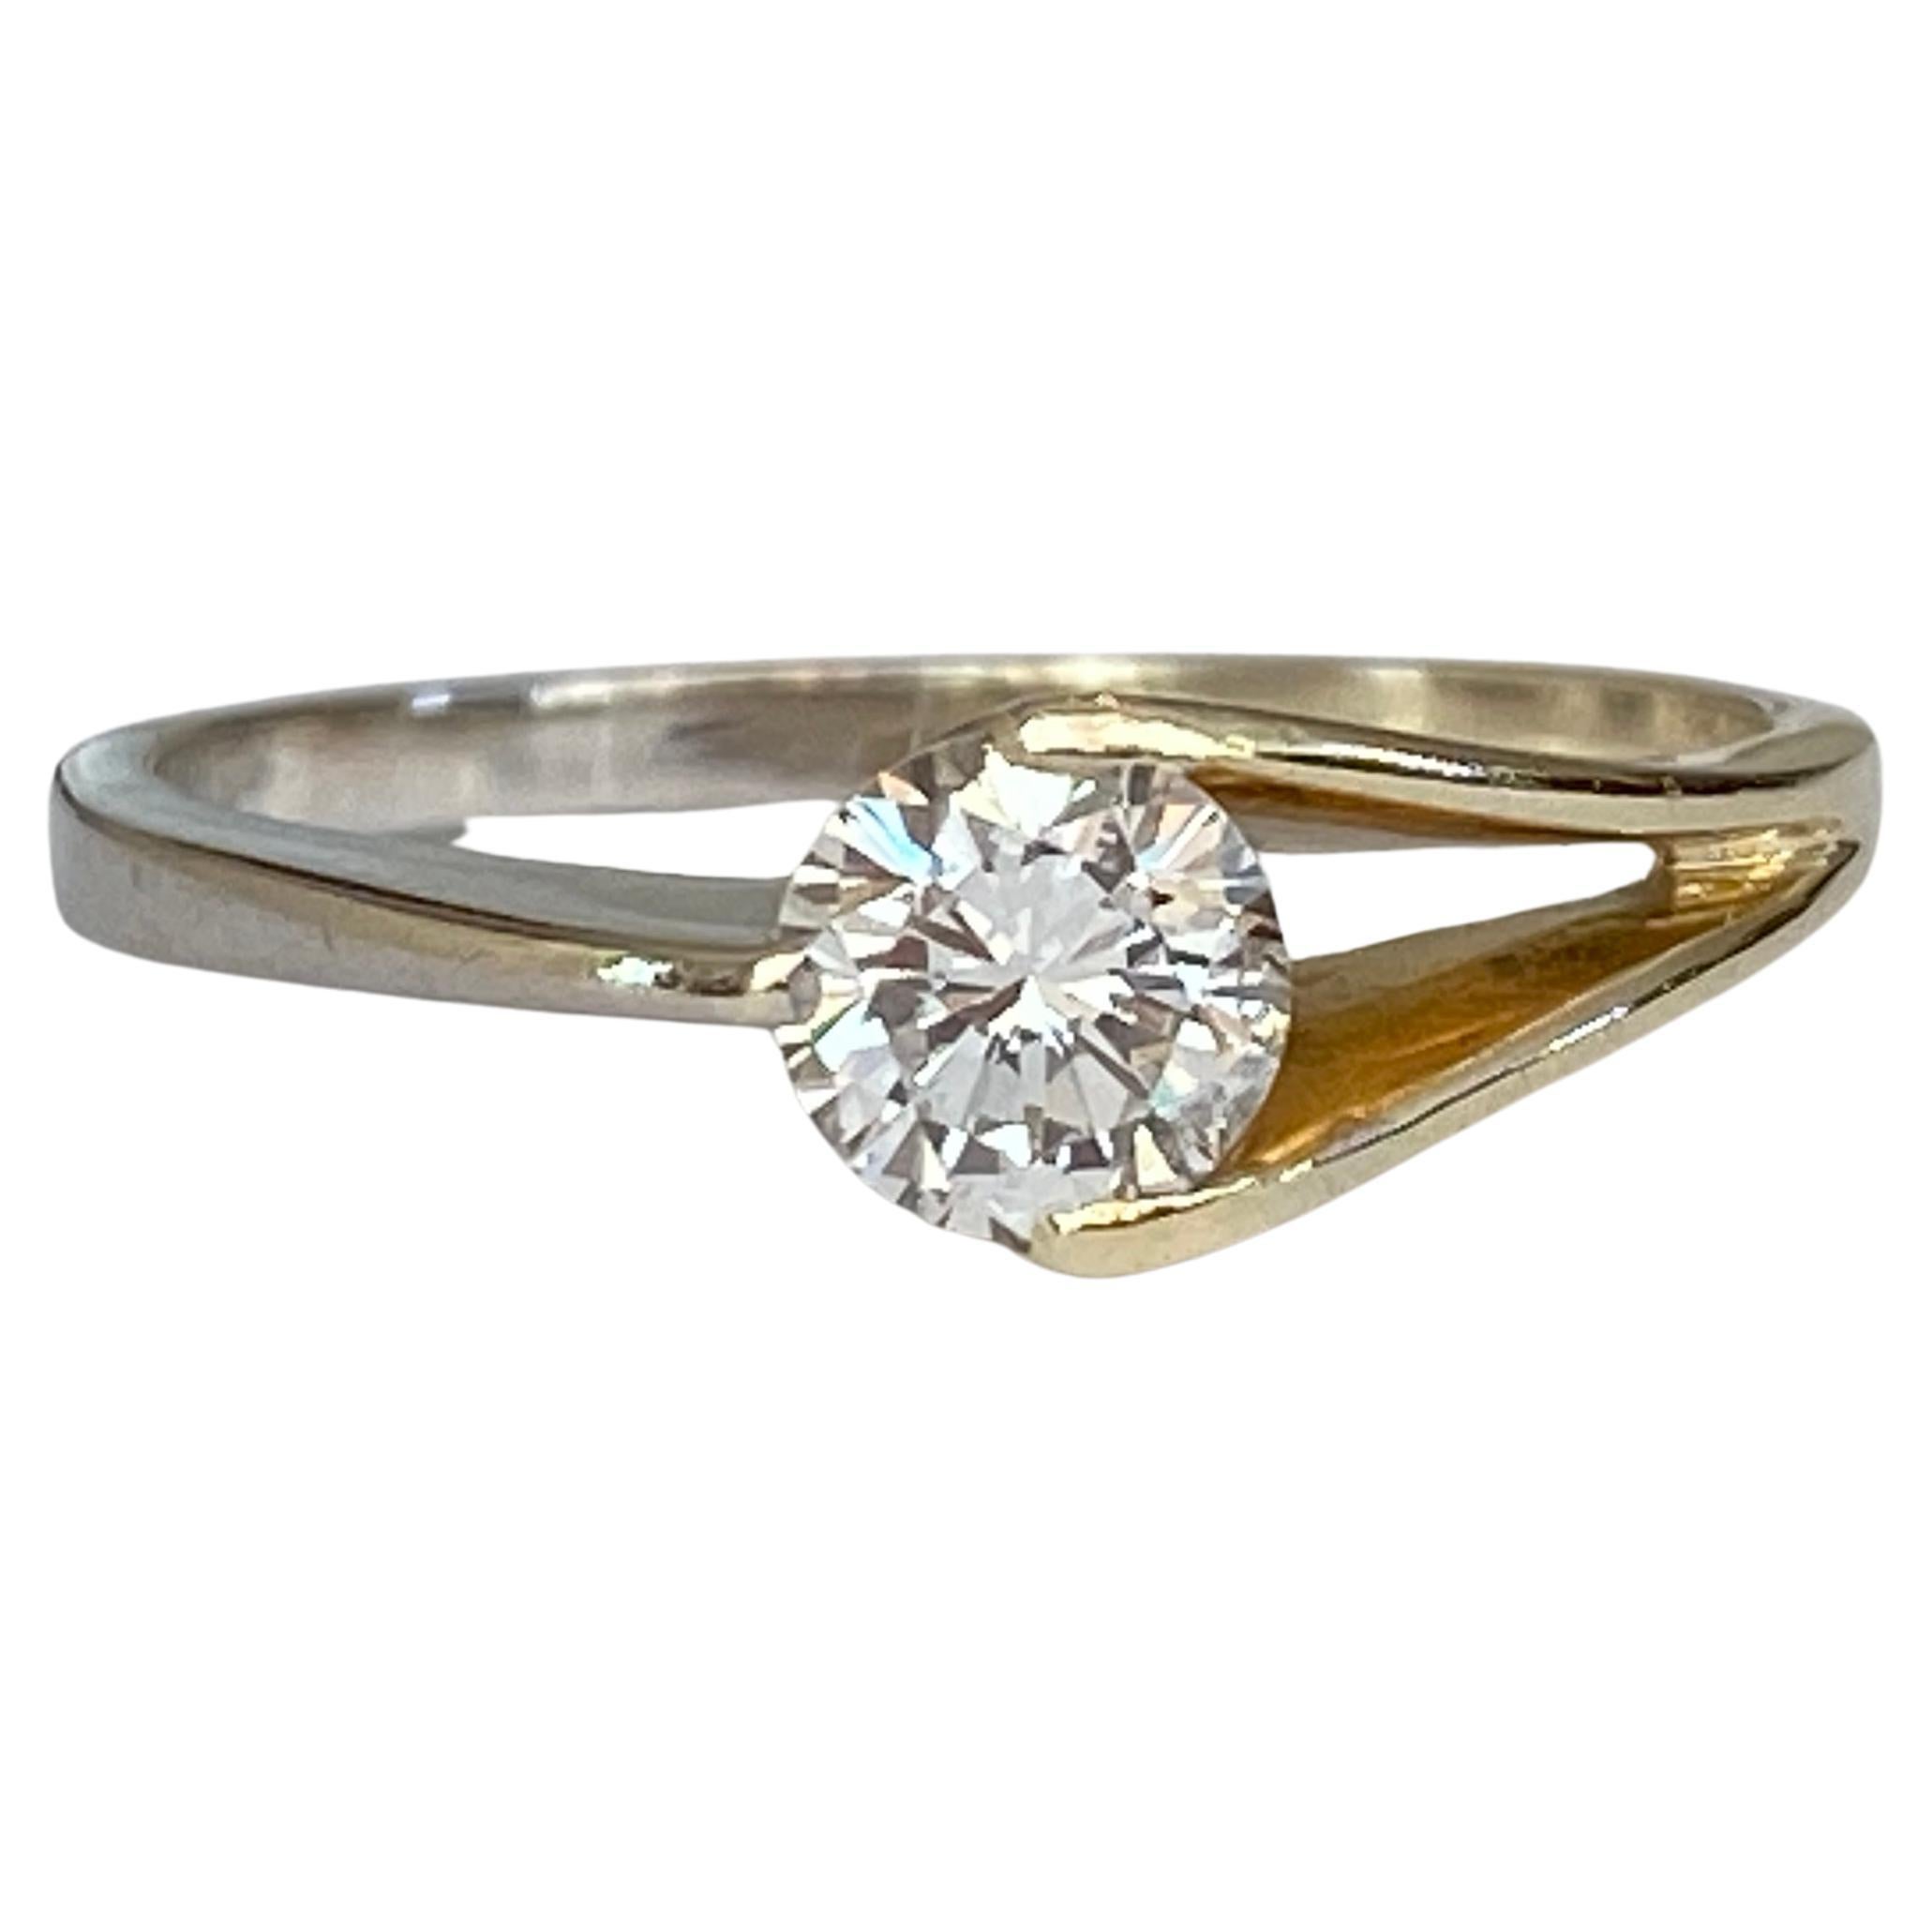 ALGT  Certificied 0.48 Carat Diamond Engagement Ring For Sale